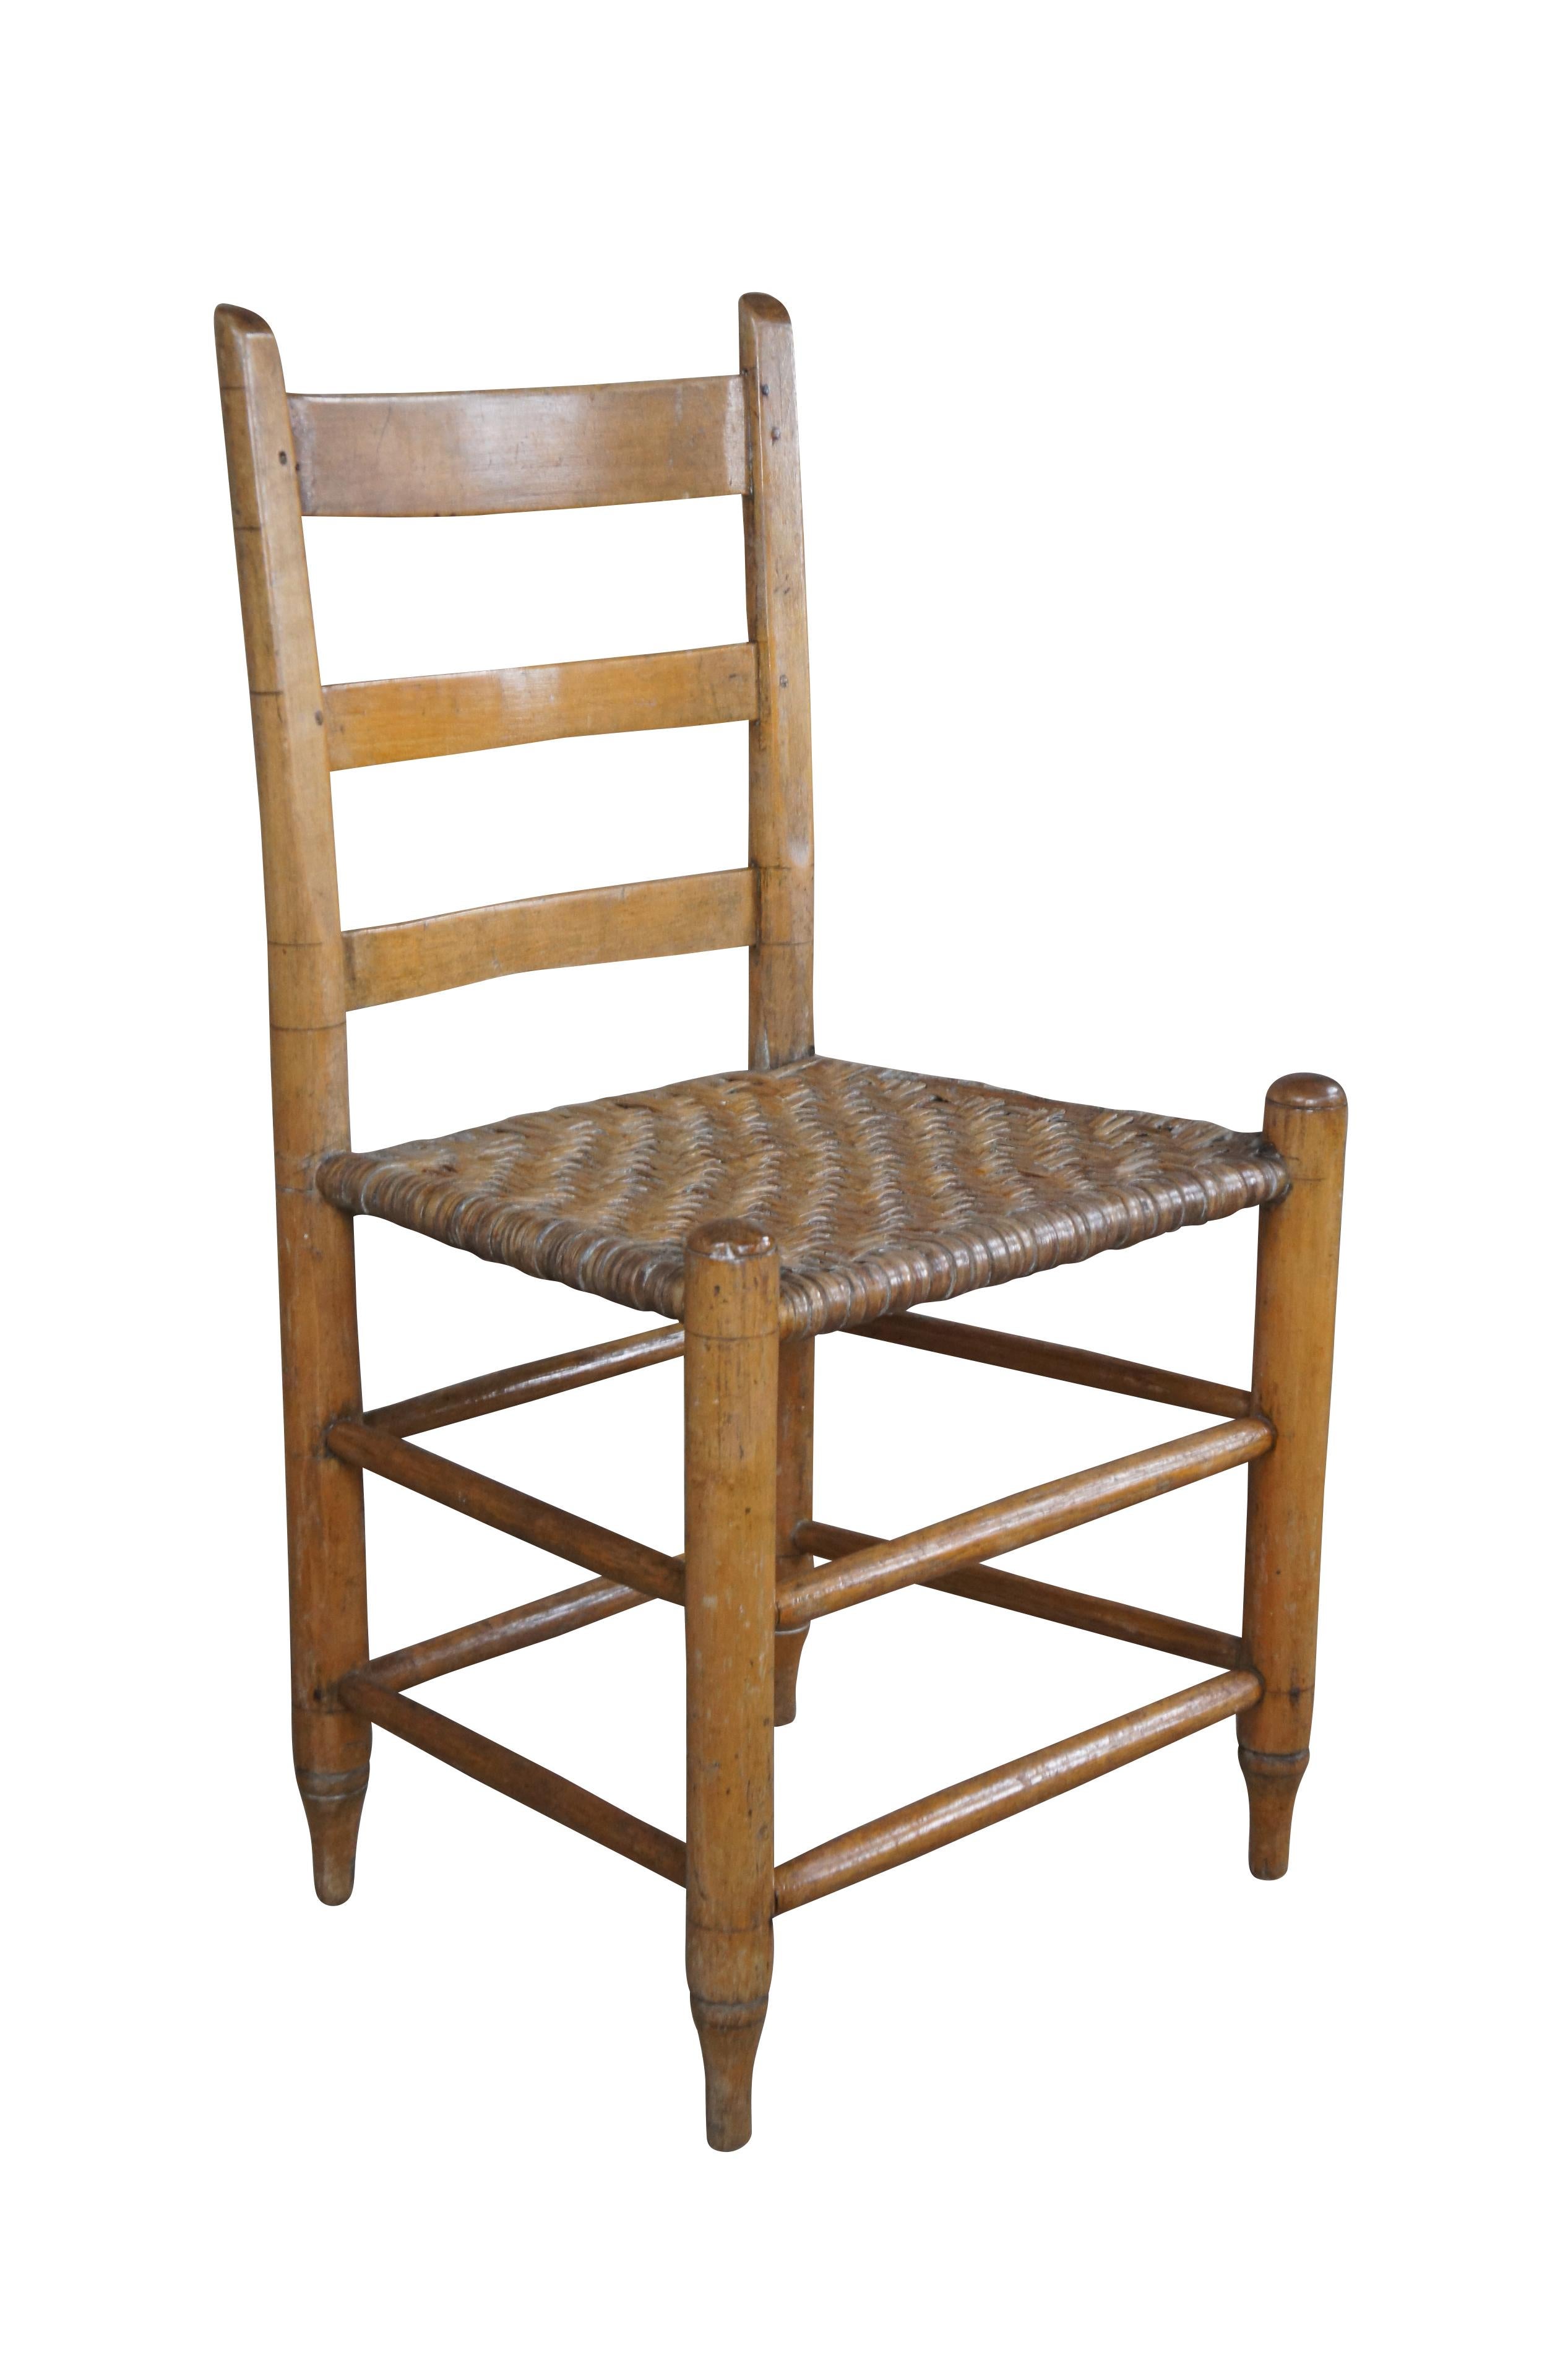 Antique Primitive Shaker farmhouse chair. Made of maple featuring thumb back and ladderback with woven rush seat and tapered feet.

Dimensions: 
18.5